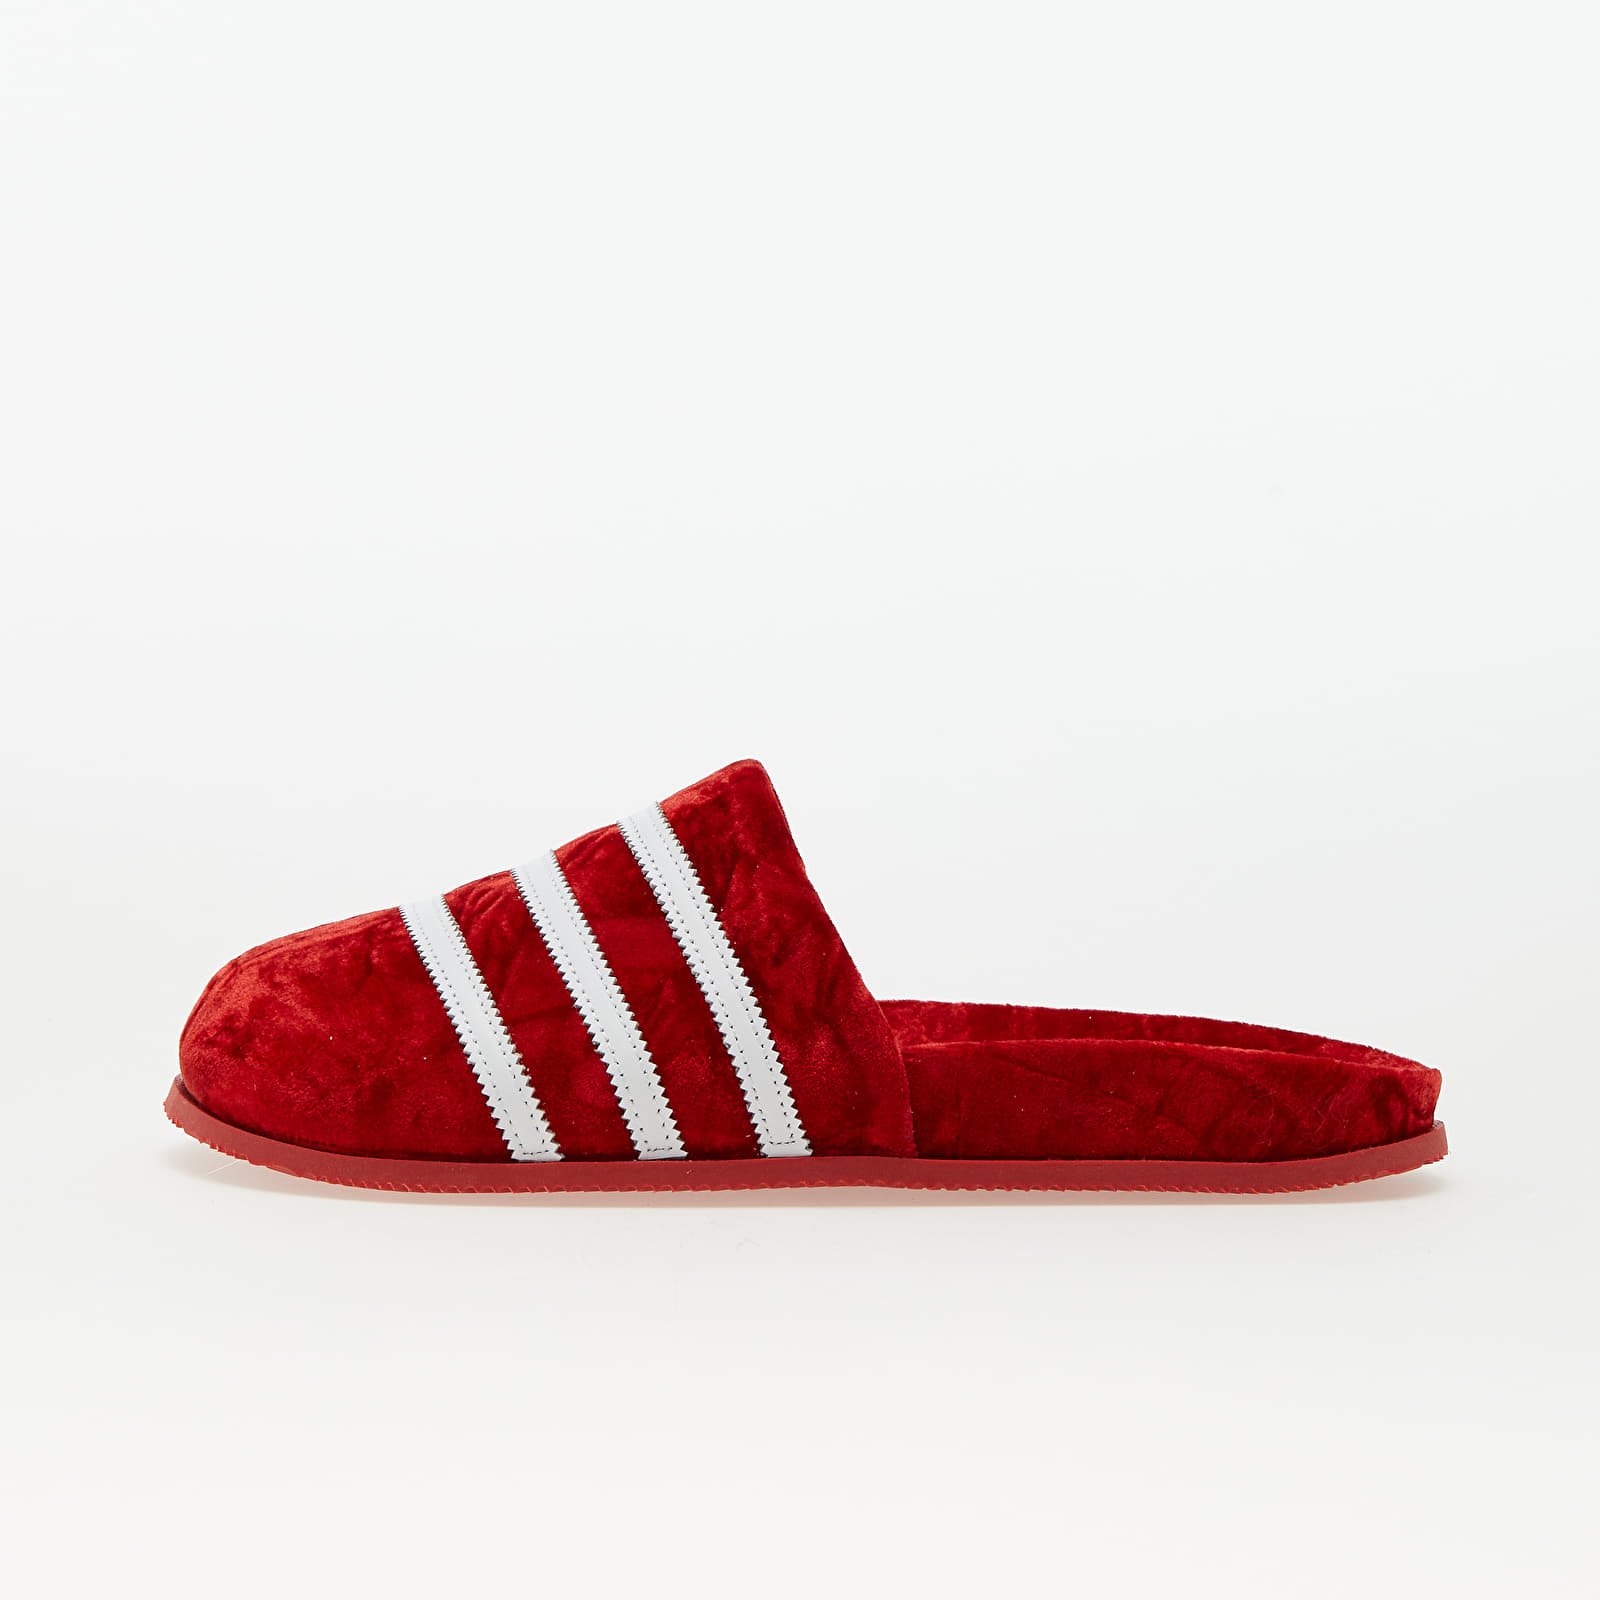 Men's shoes adidas Adimule Red/ Ftw White/ Red